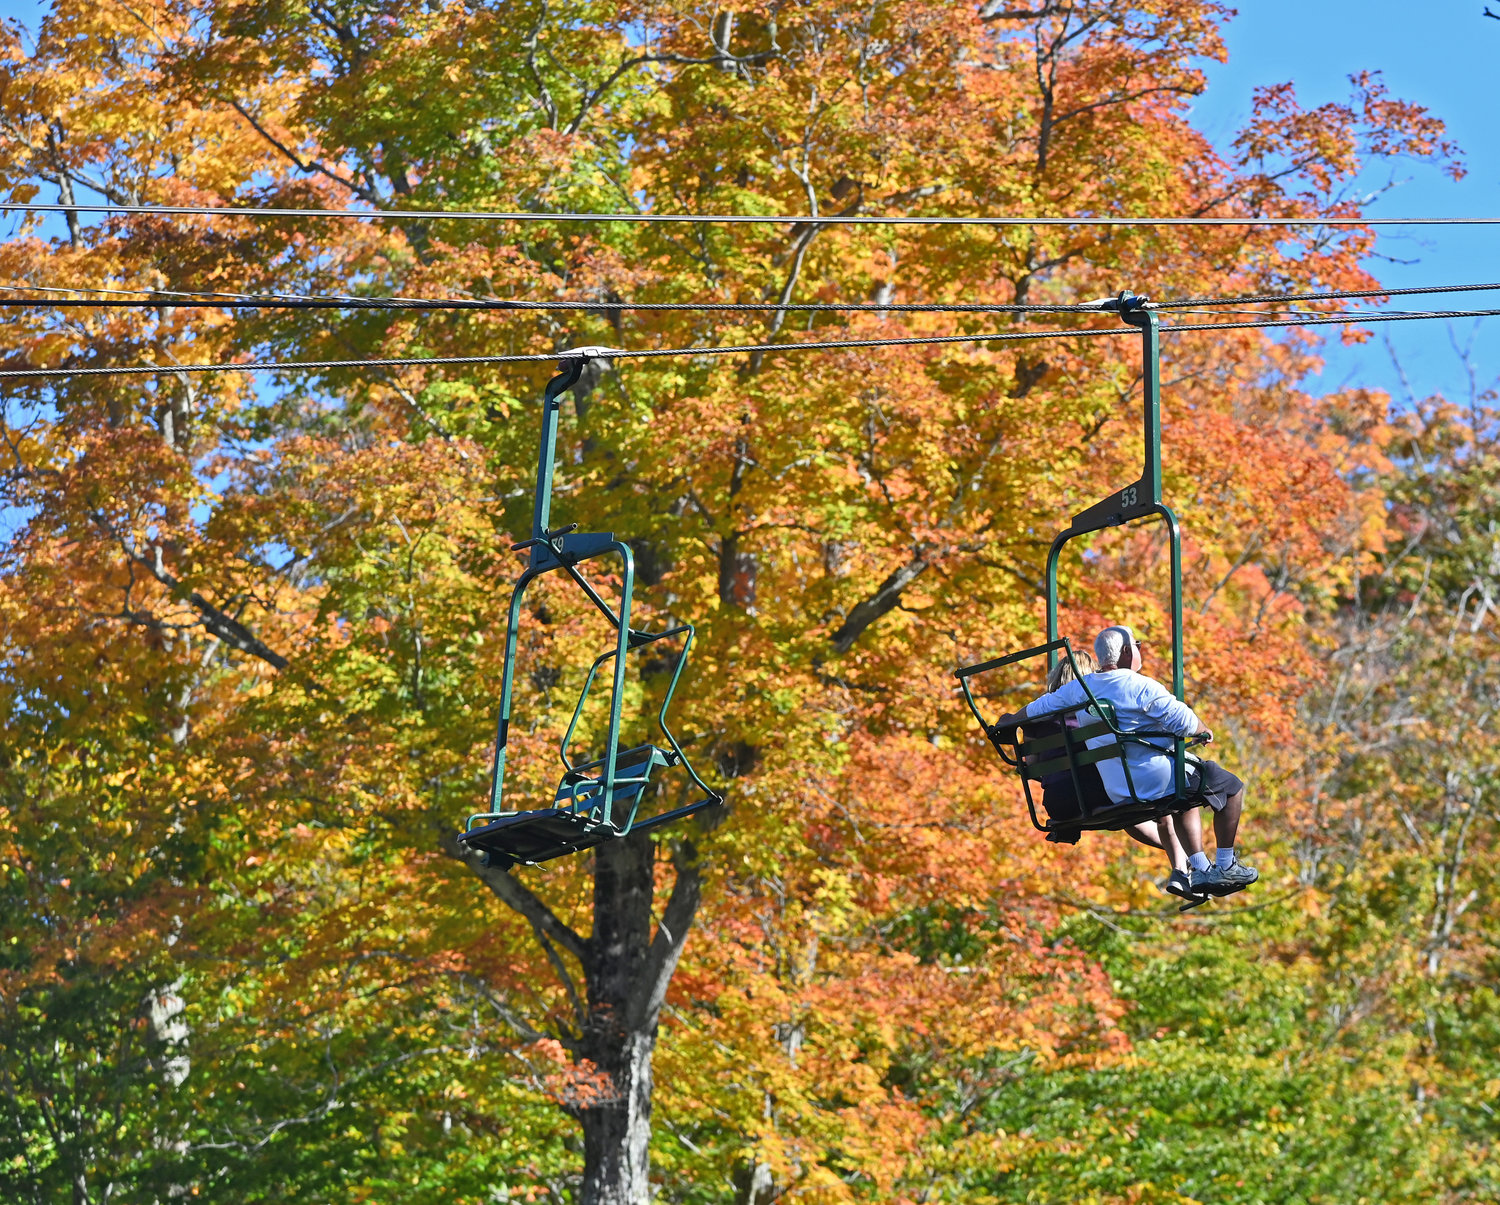 The scenic ski lift at McCauley Mountain with foliage that is almost at peak on Oct. 7, 2021.